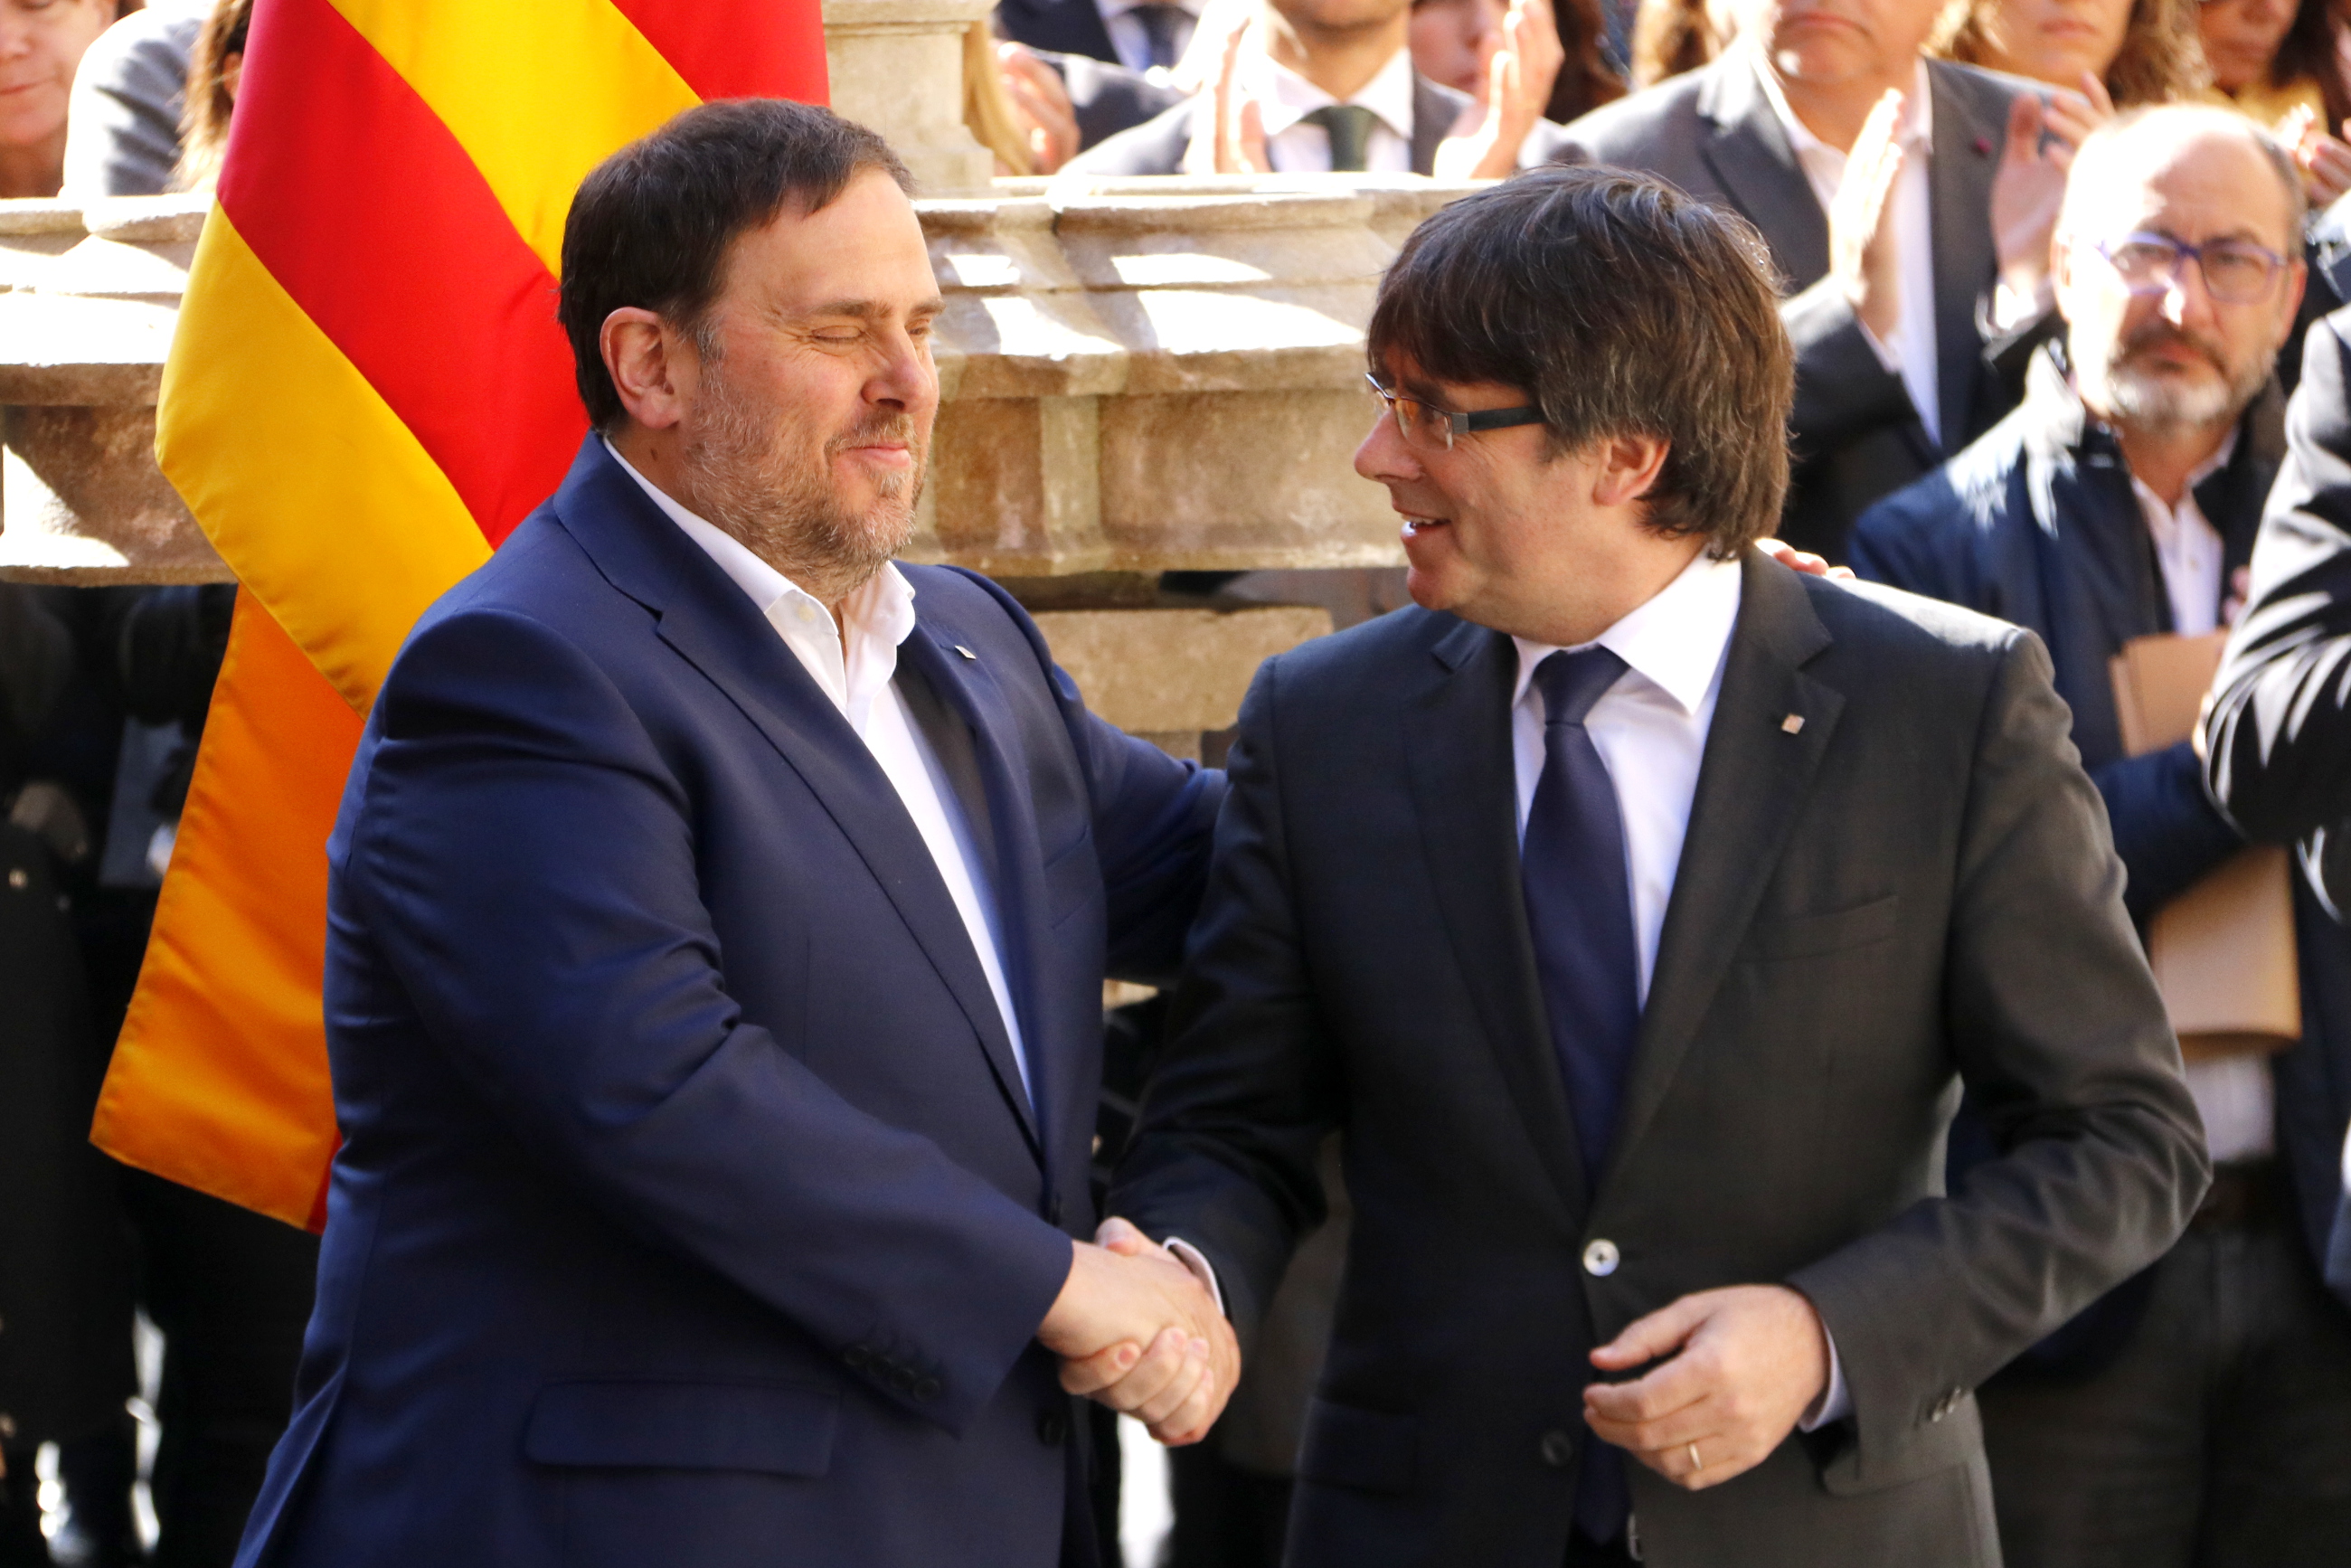 Catalan President, Carles Puigdemont shaking hands with Catalan VP, Oriol Junqueras during the event to emphasize the Government's commitment to call a referendum (by ACN)